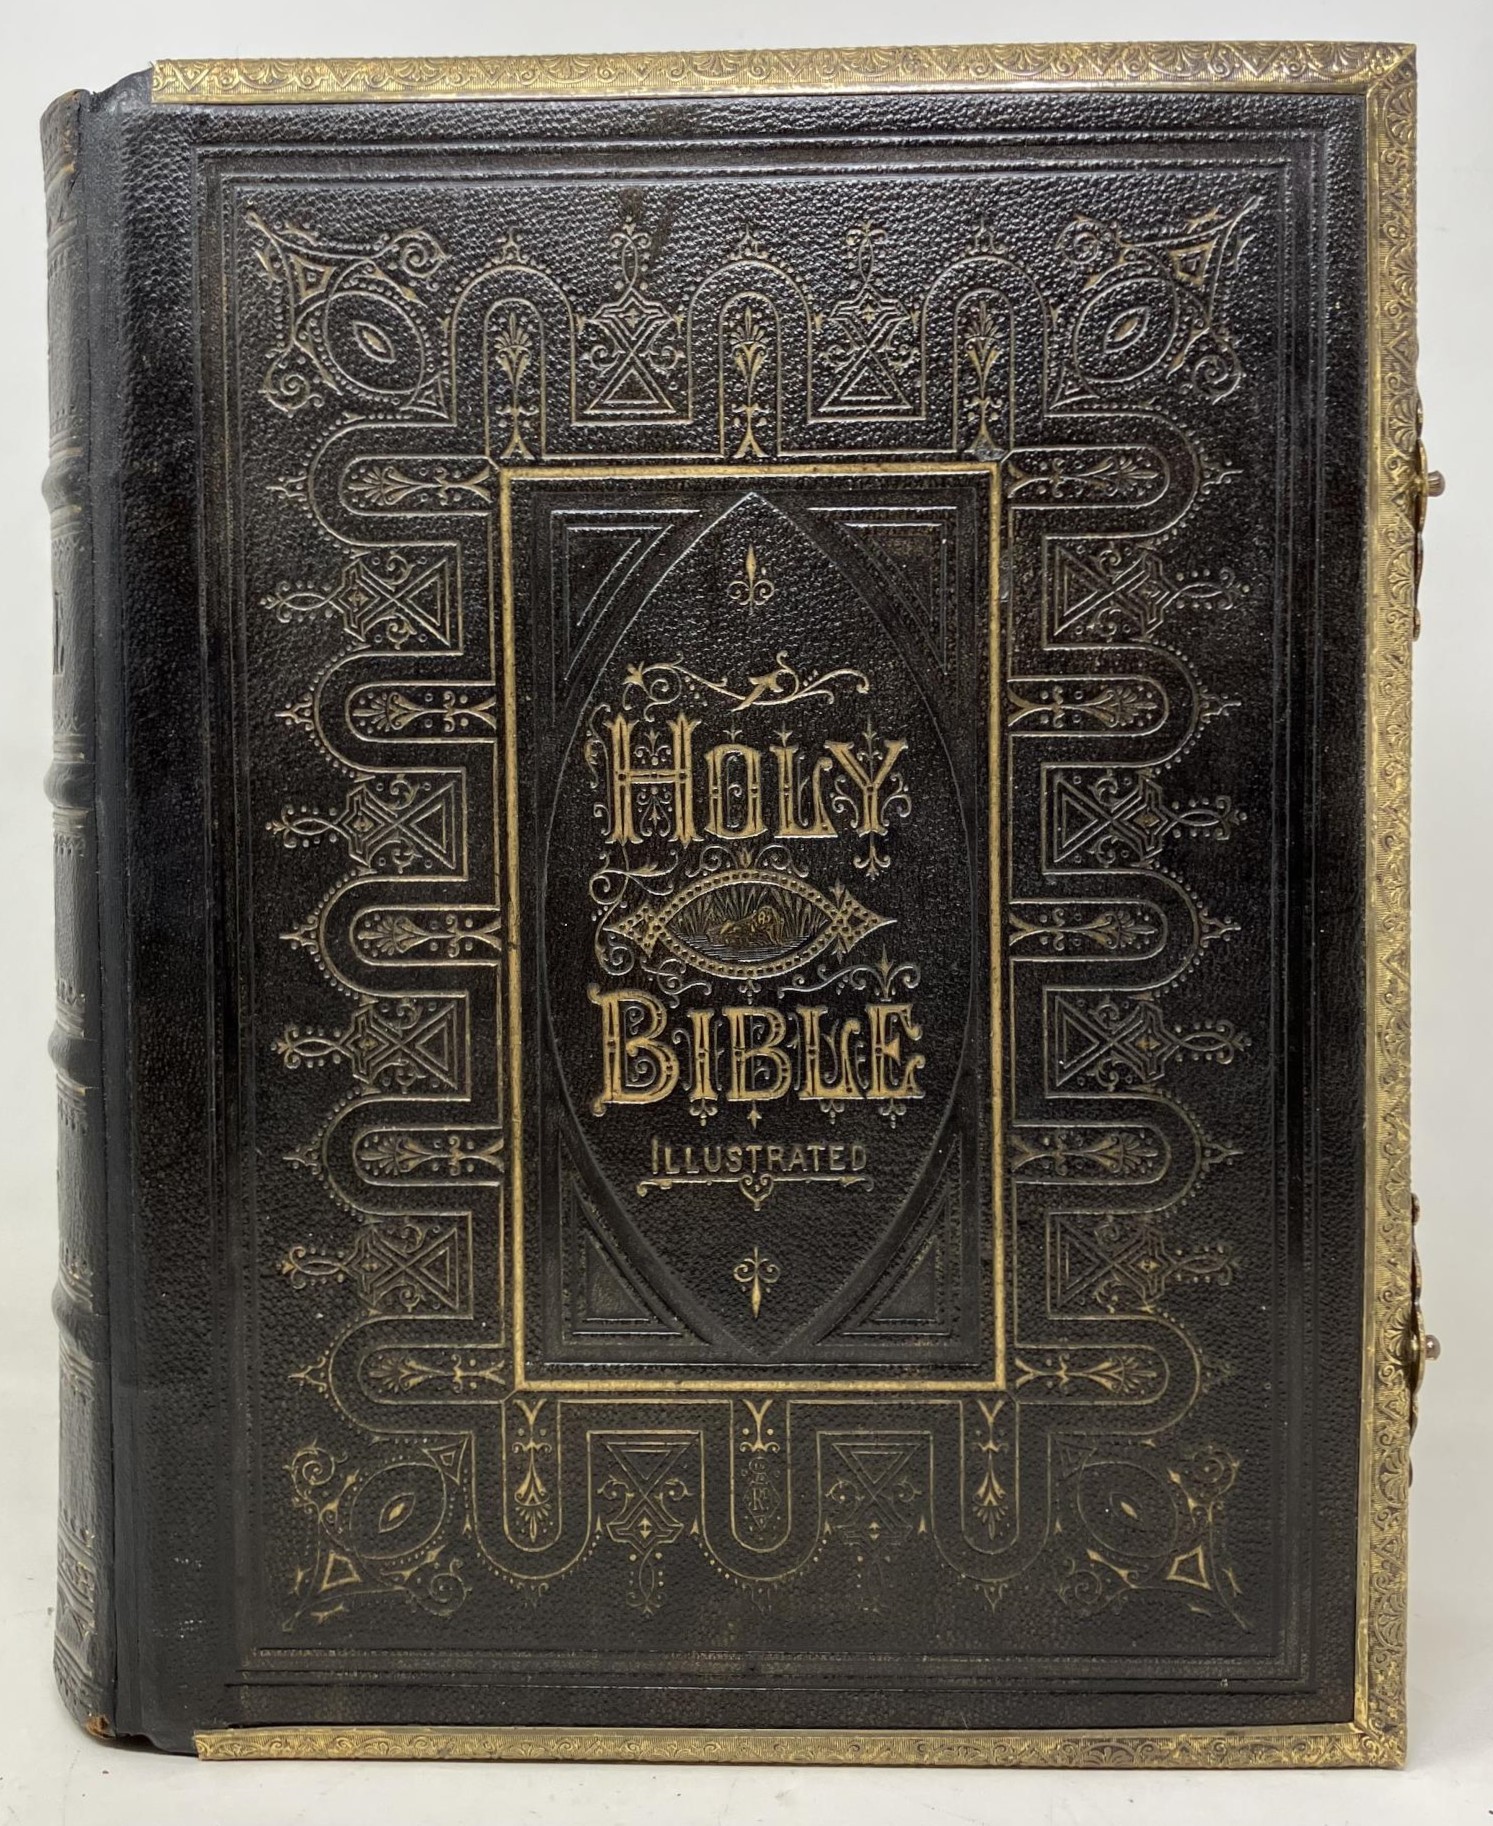 The Bible, International Library Of Famous Literature, 19 vols., Old & New London, 8 vols., 20th